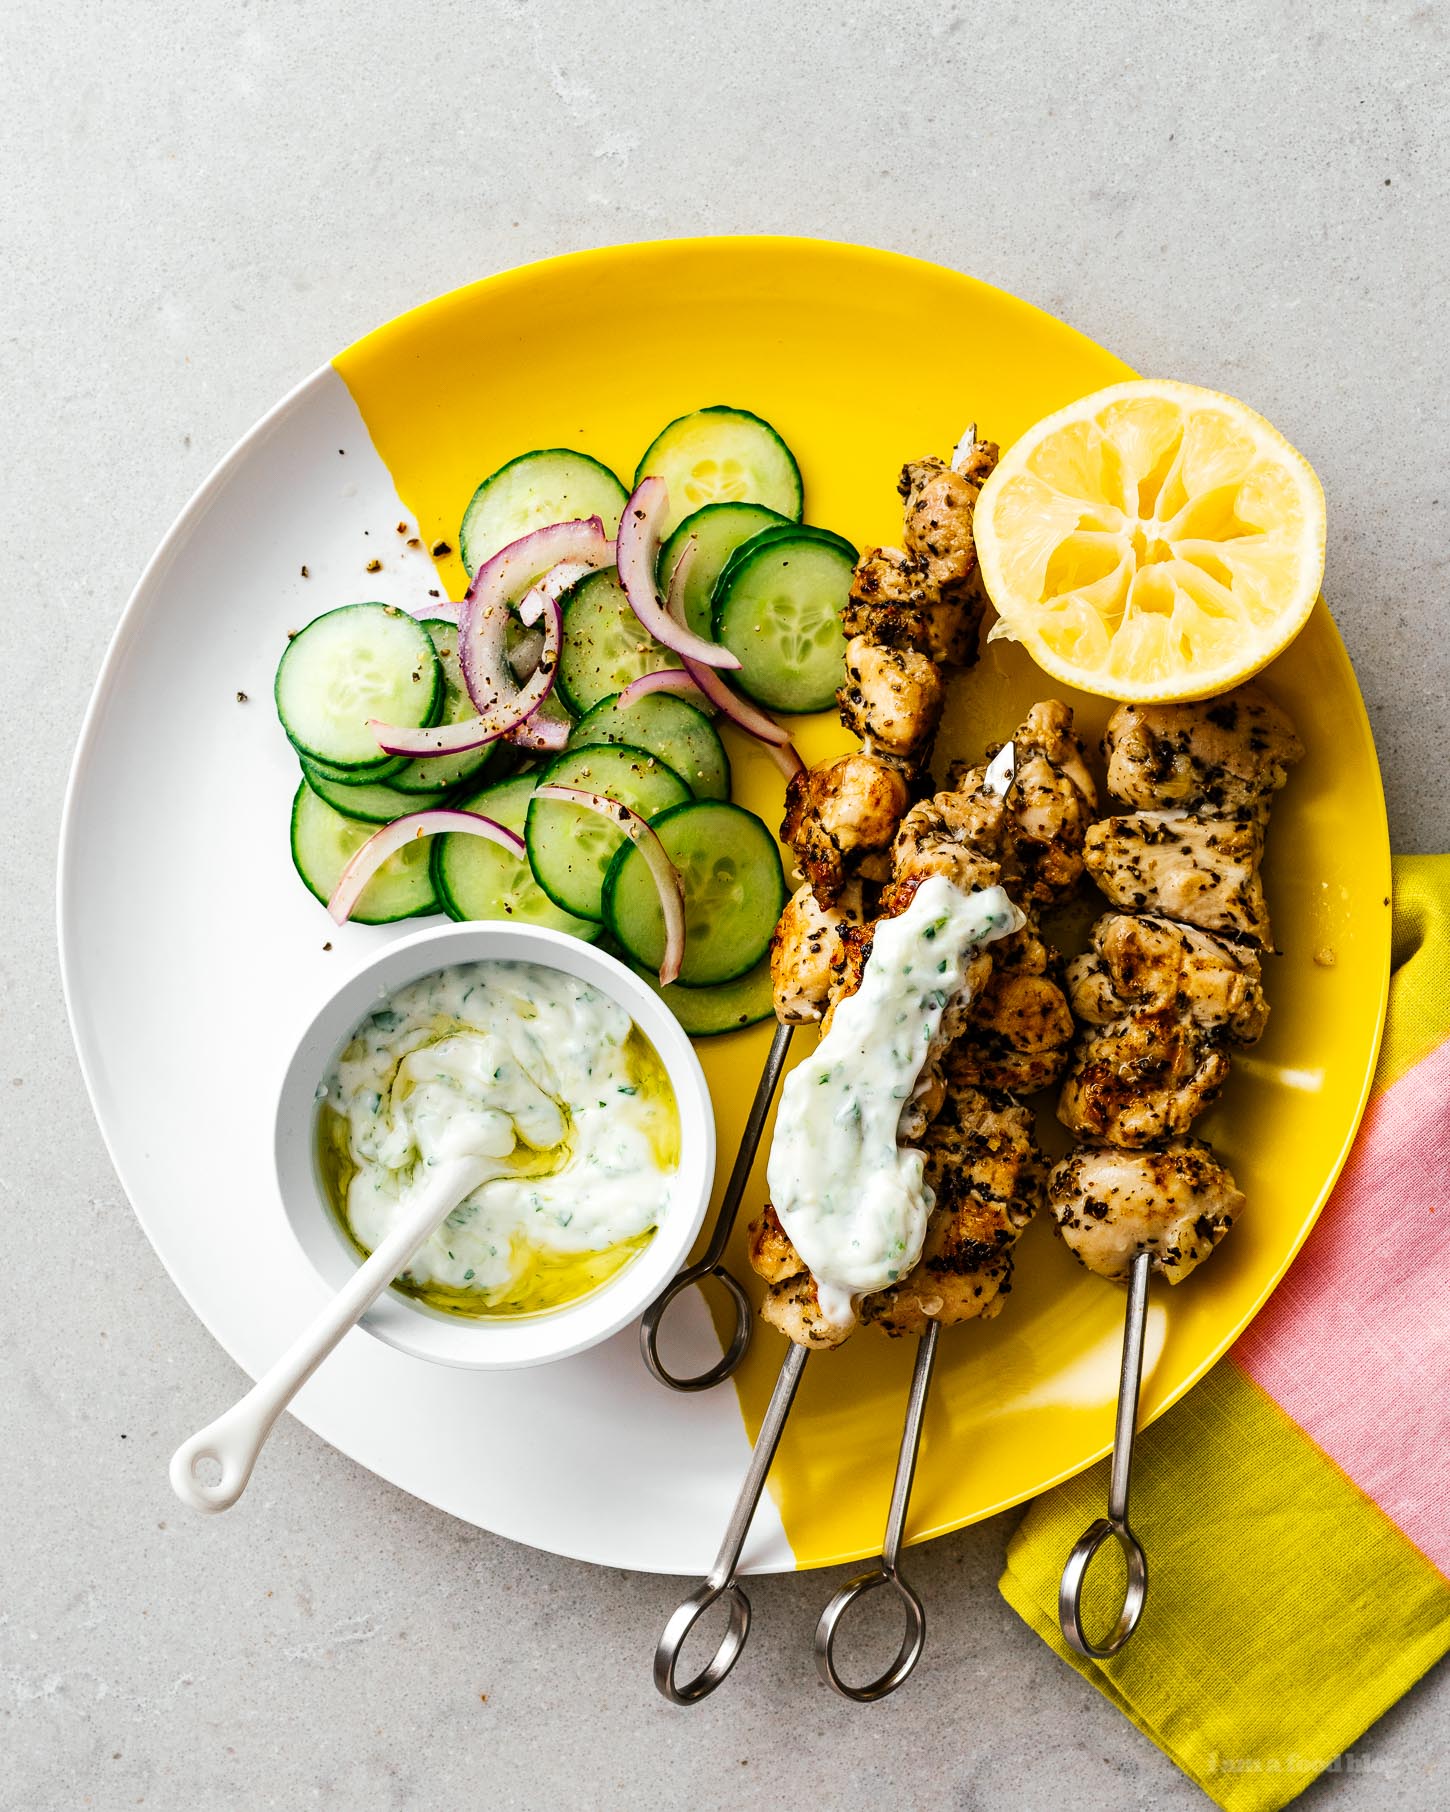 If you love chicken and are looking for a tasty recipe that’s easy to cook in the oven or on the grill, this low carb keto friendly chicken souvlaki is for you! #lowcarb #keto #ketofriendly #ketorecipe #chicken #chickenrecipe #recipes #dinner